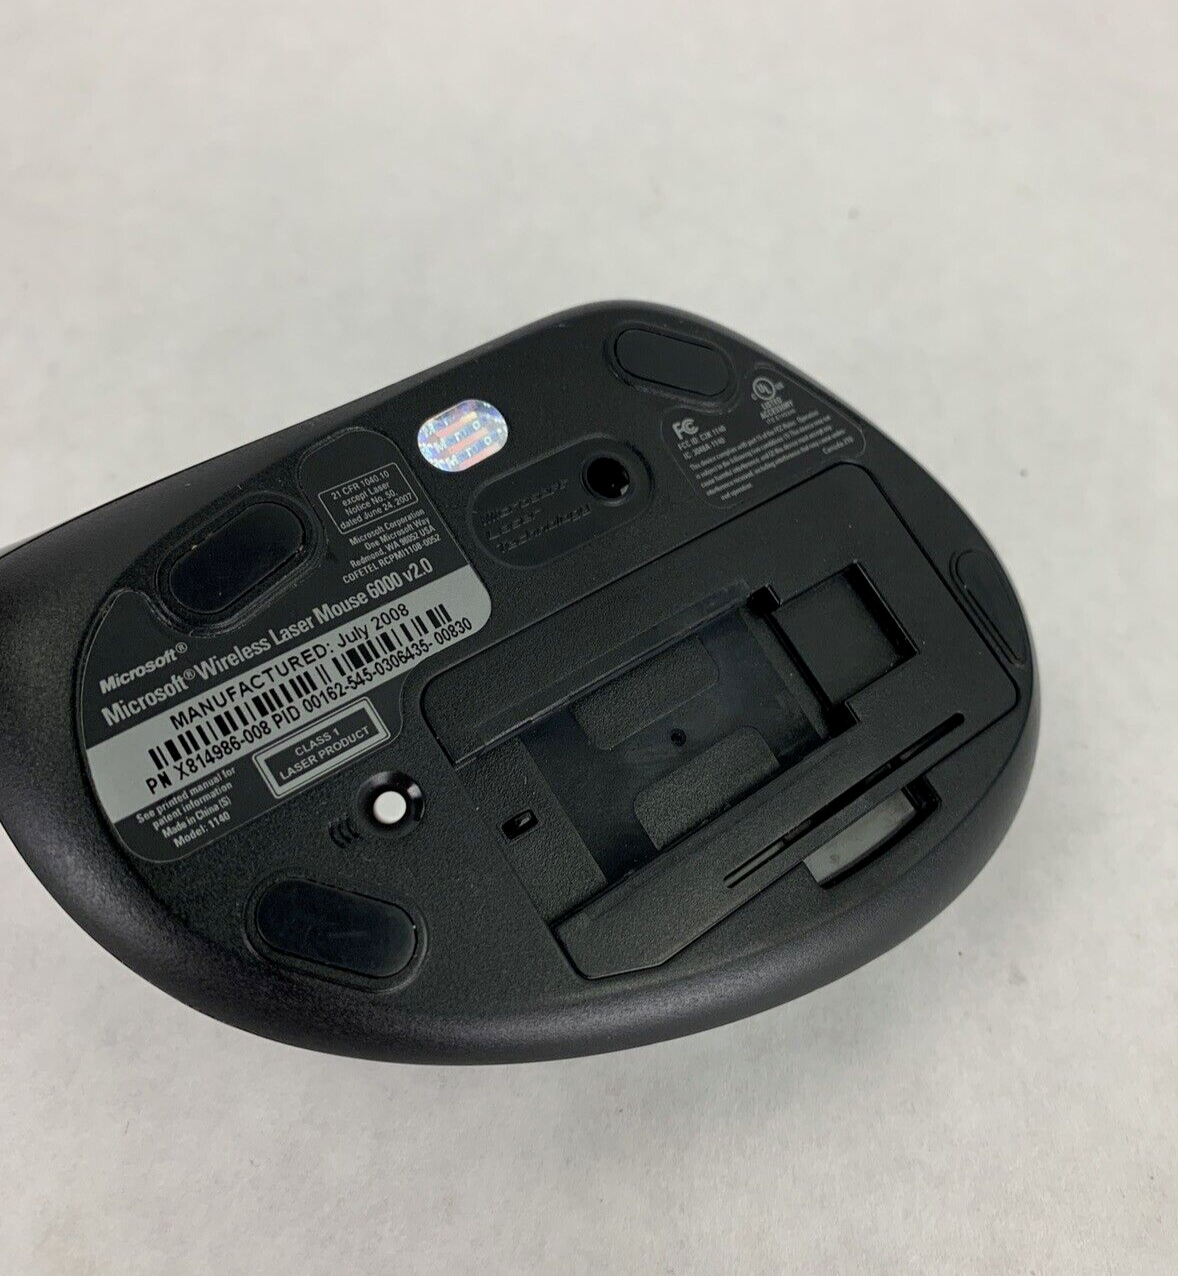 Microsoft Wireless Laser Mouse 6000 v2.0 Model 1140  With USB Receiver